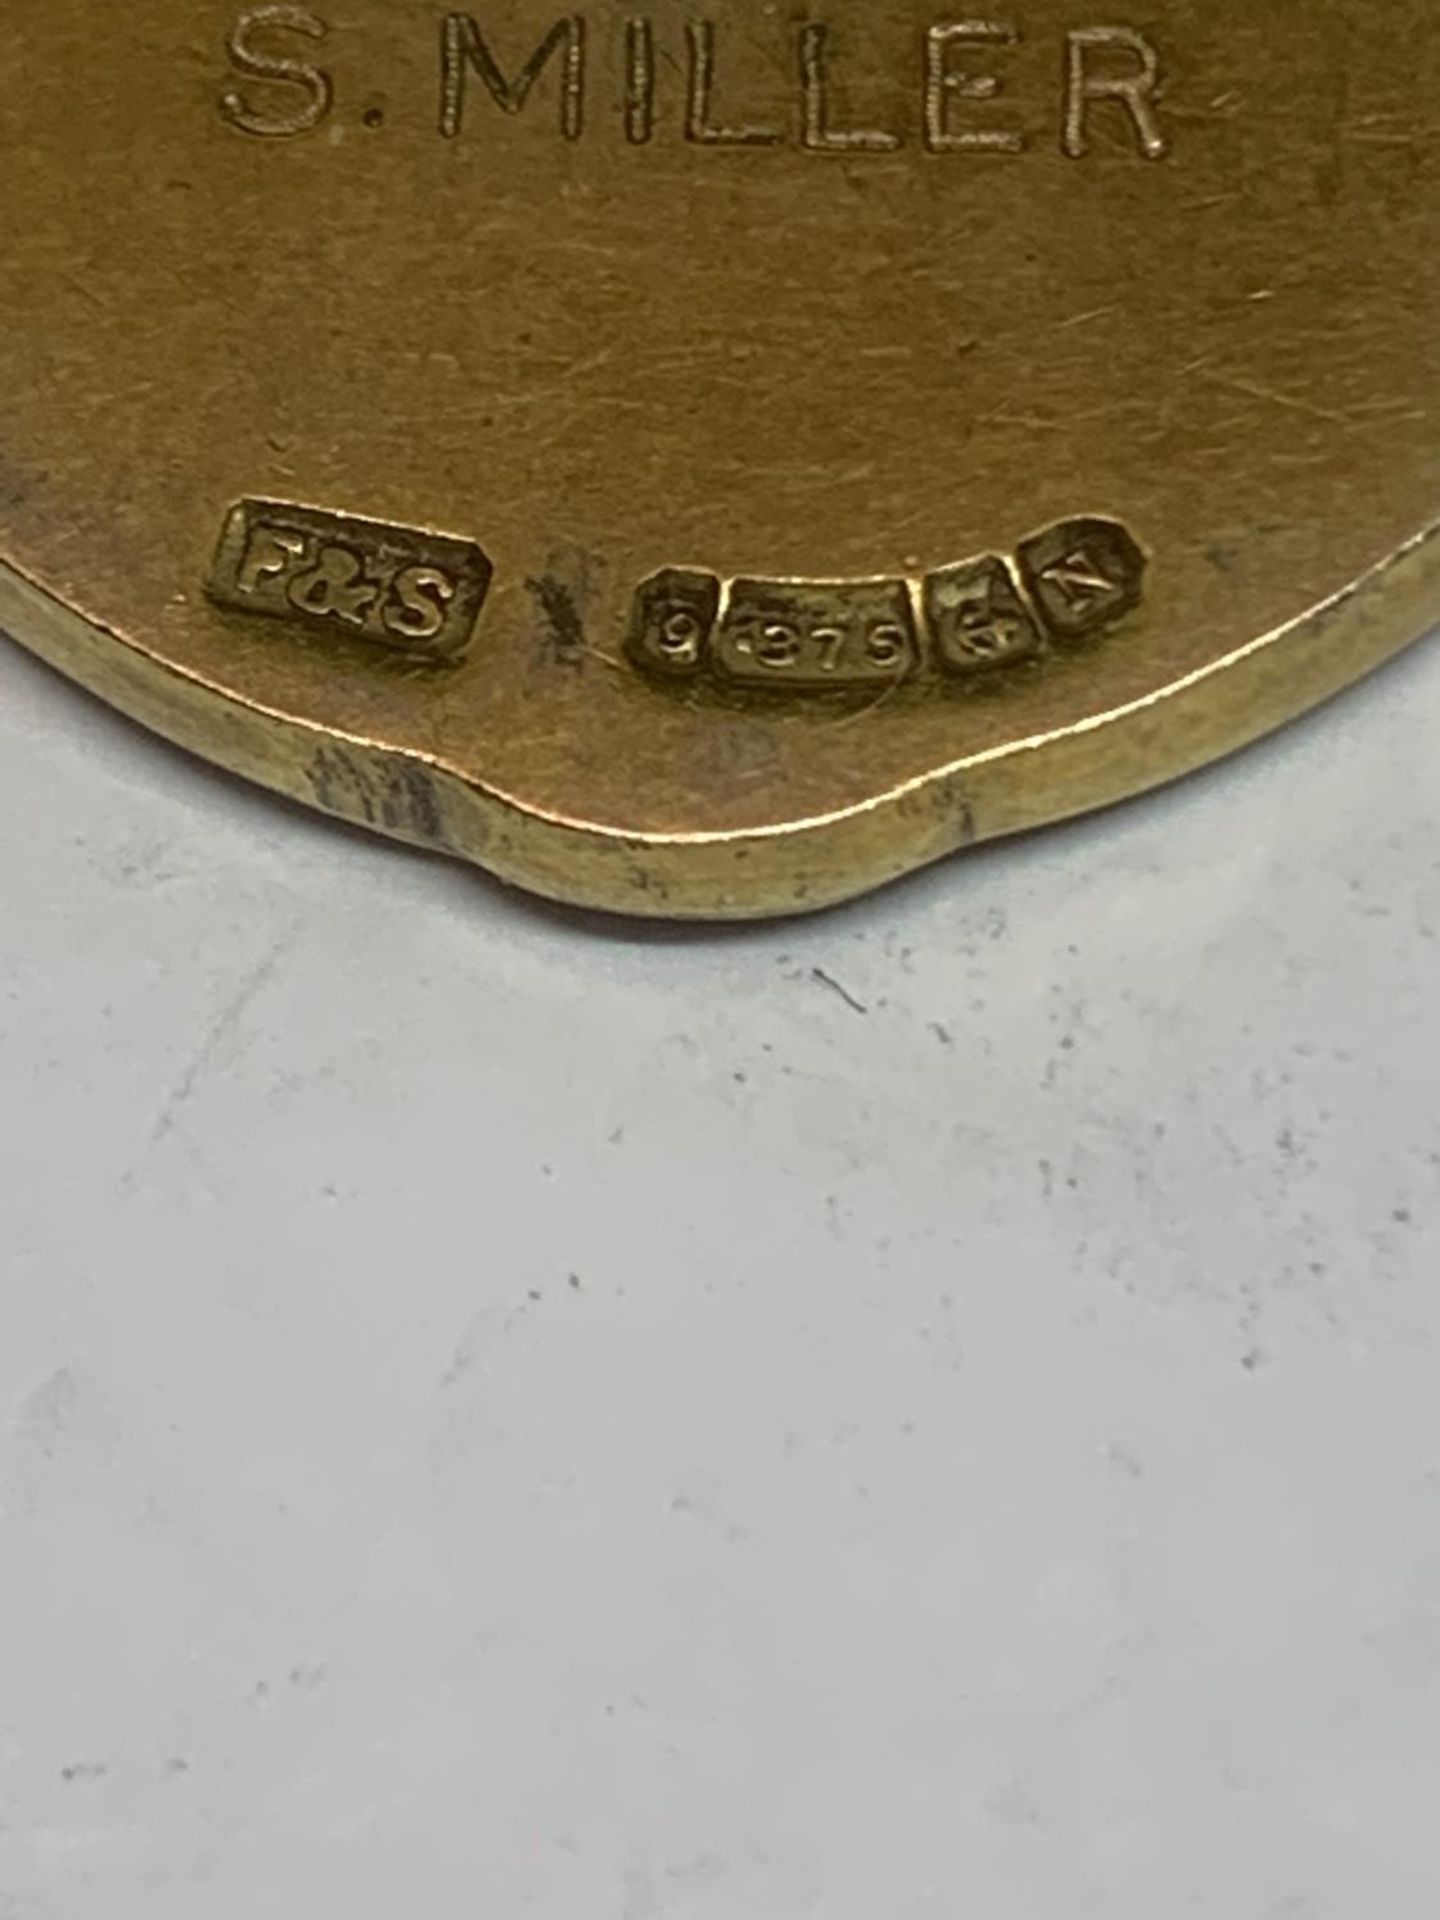 A HALLMARKED 9 CARAT GOLD NORTHERN RUGBY LEAGUE FOOTBALL MEDAL ENGRAVED SALFORD WINNERS 1936 -7 S. - Image 4 of 5